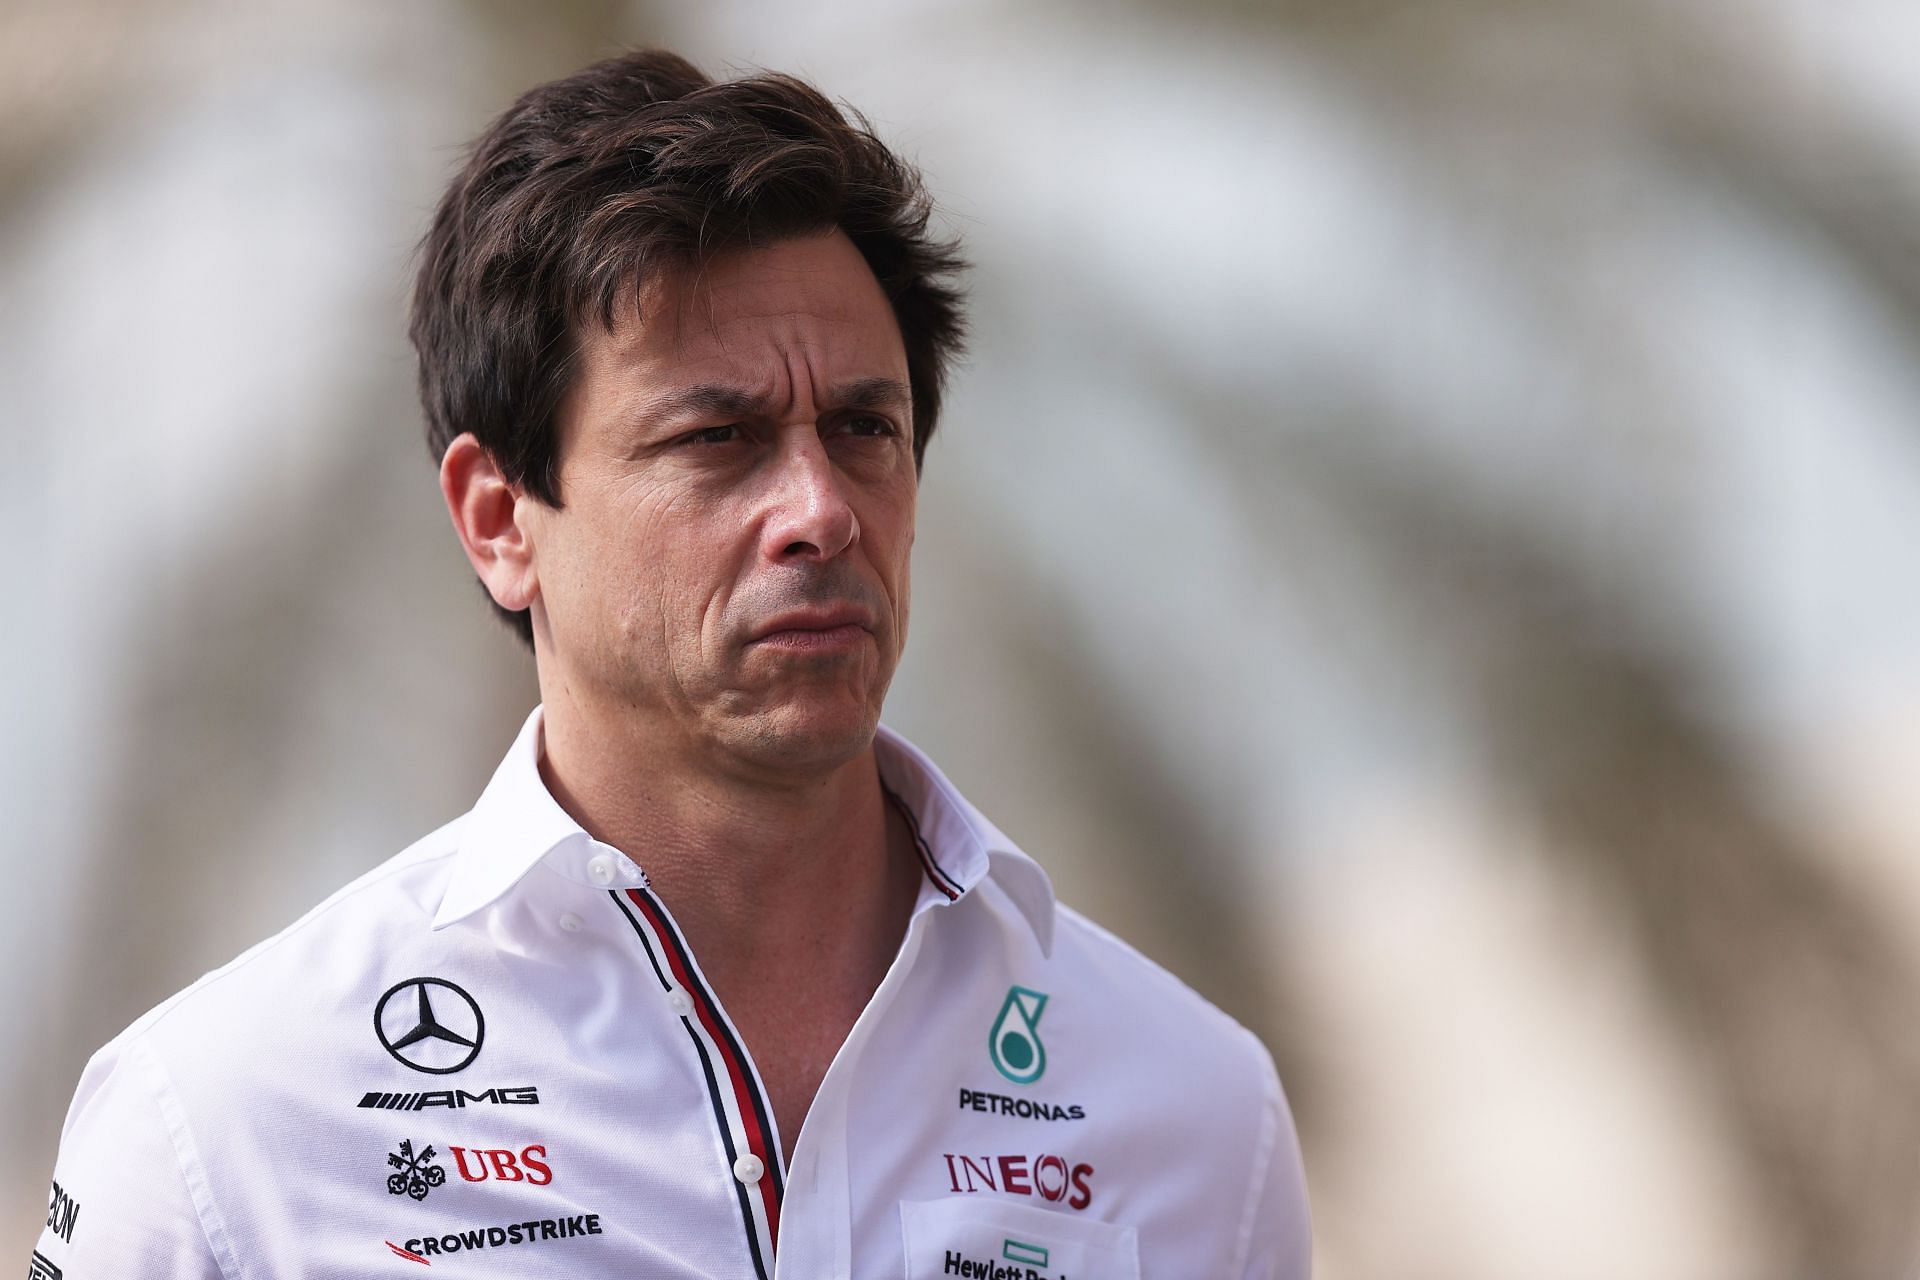 Mercedes GP Executive Director Toto Wolff walks in the Paddock ahead of the 2021 season finale in Abu Dhabi. (Photo by Lars Baron/Getty Images)